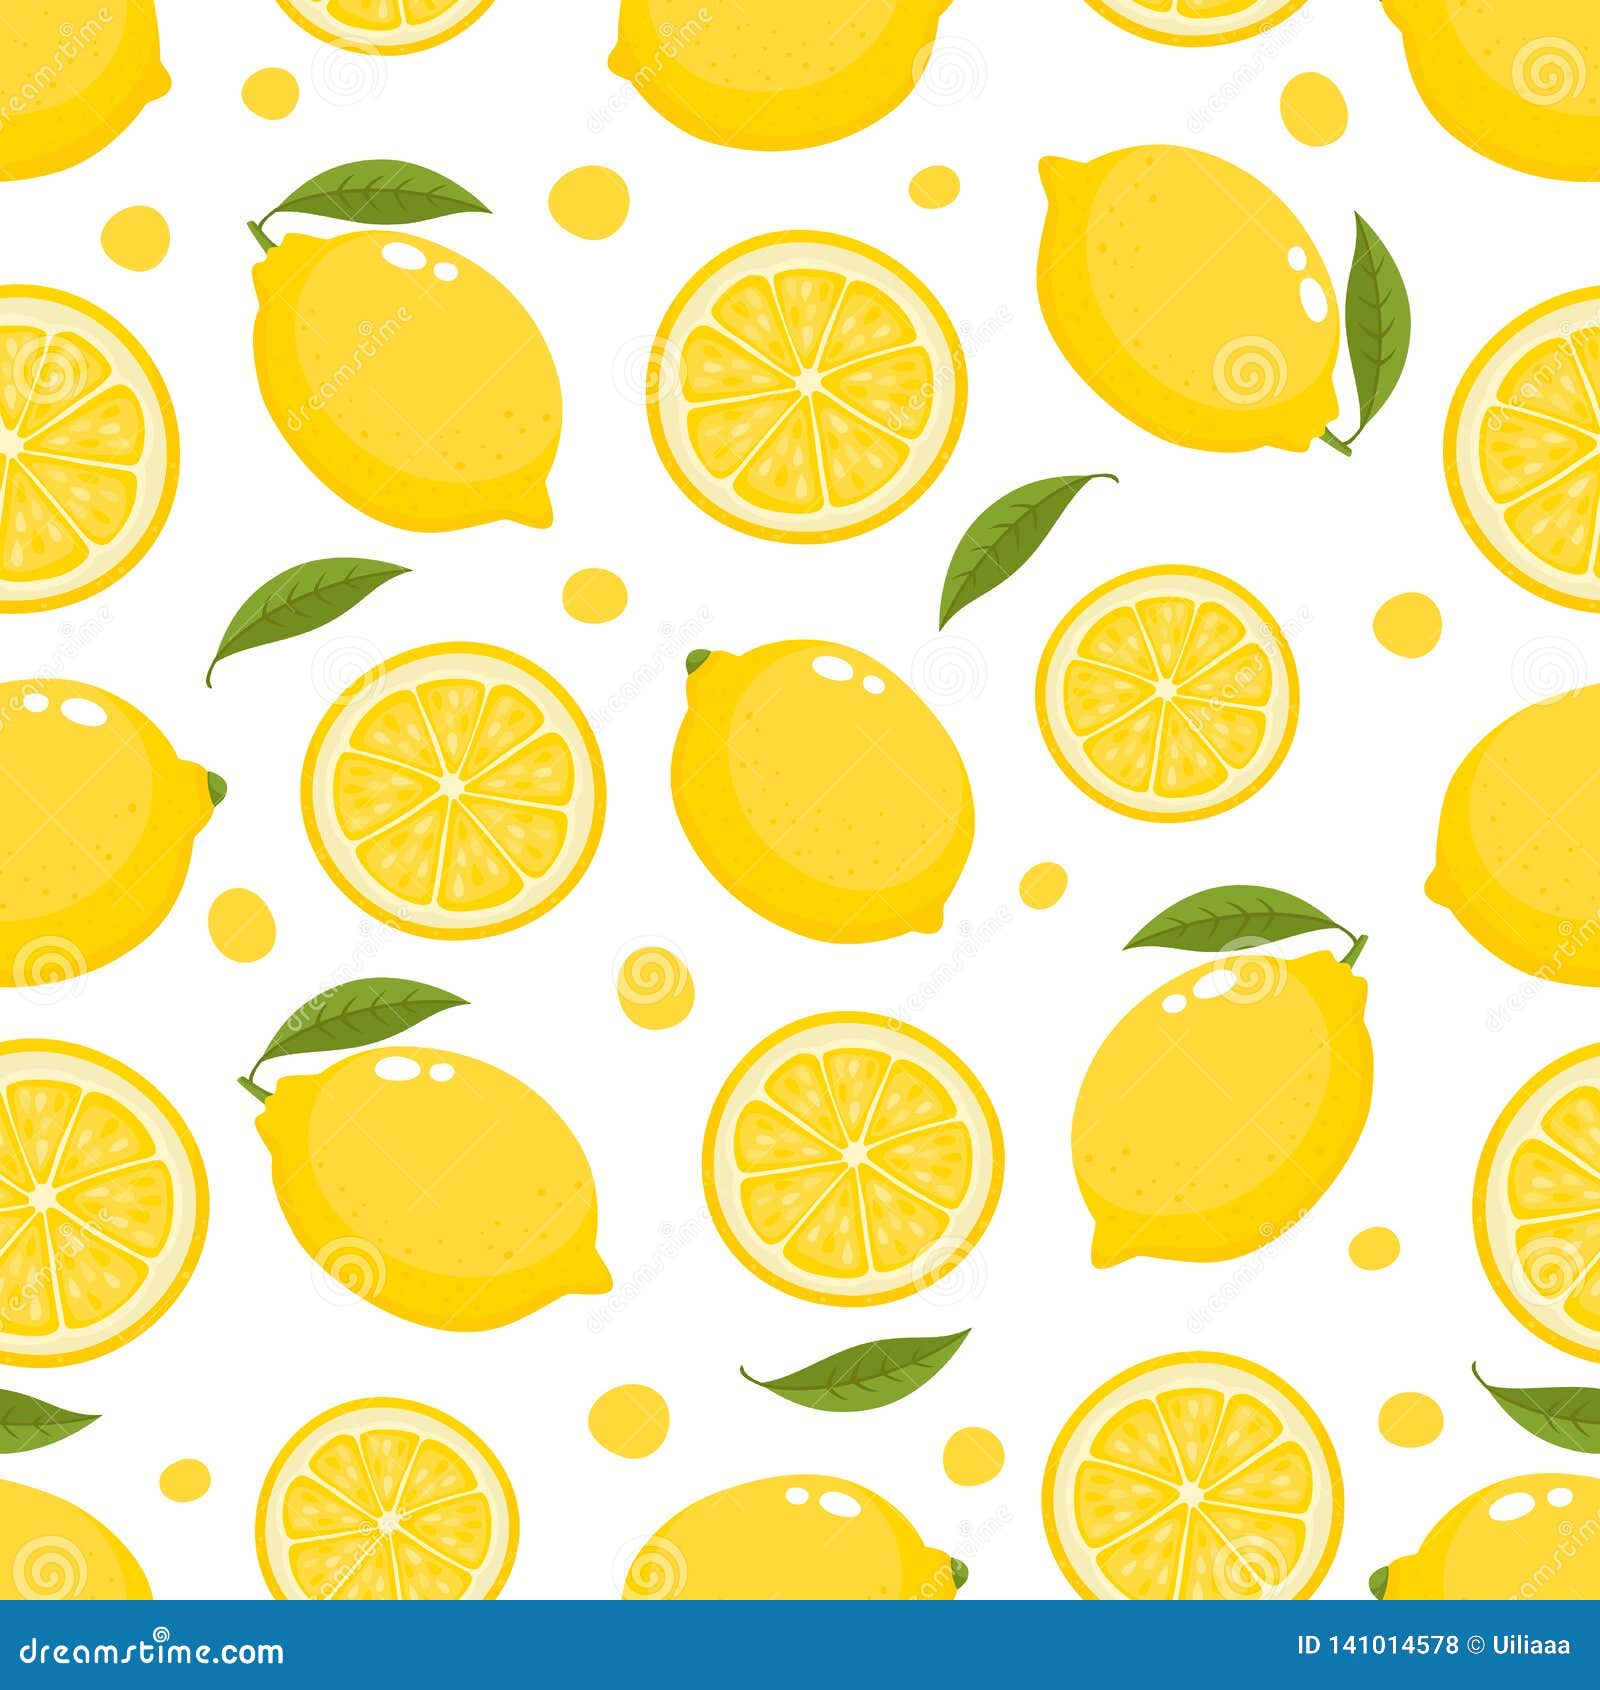 Vector Pattern with Cartoon Lemon Isolated on White. Stock Vector ...